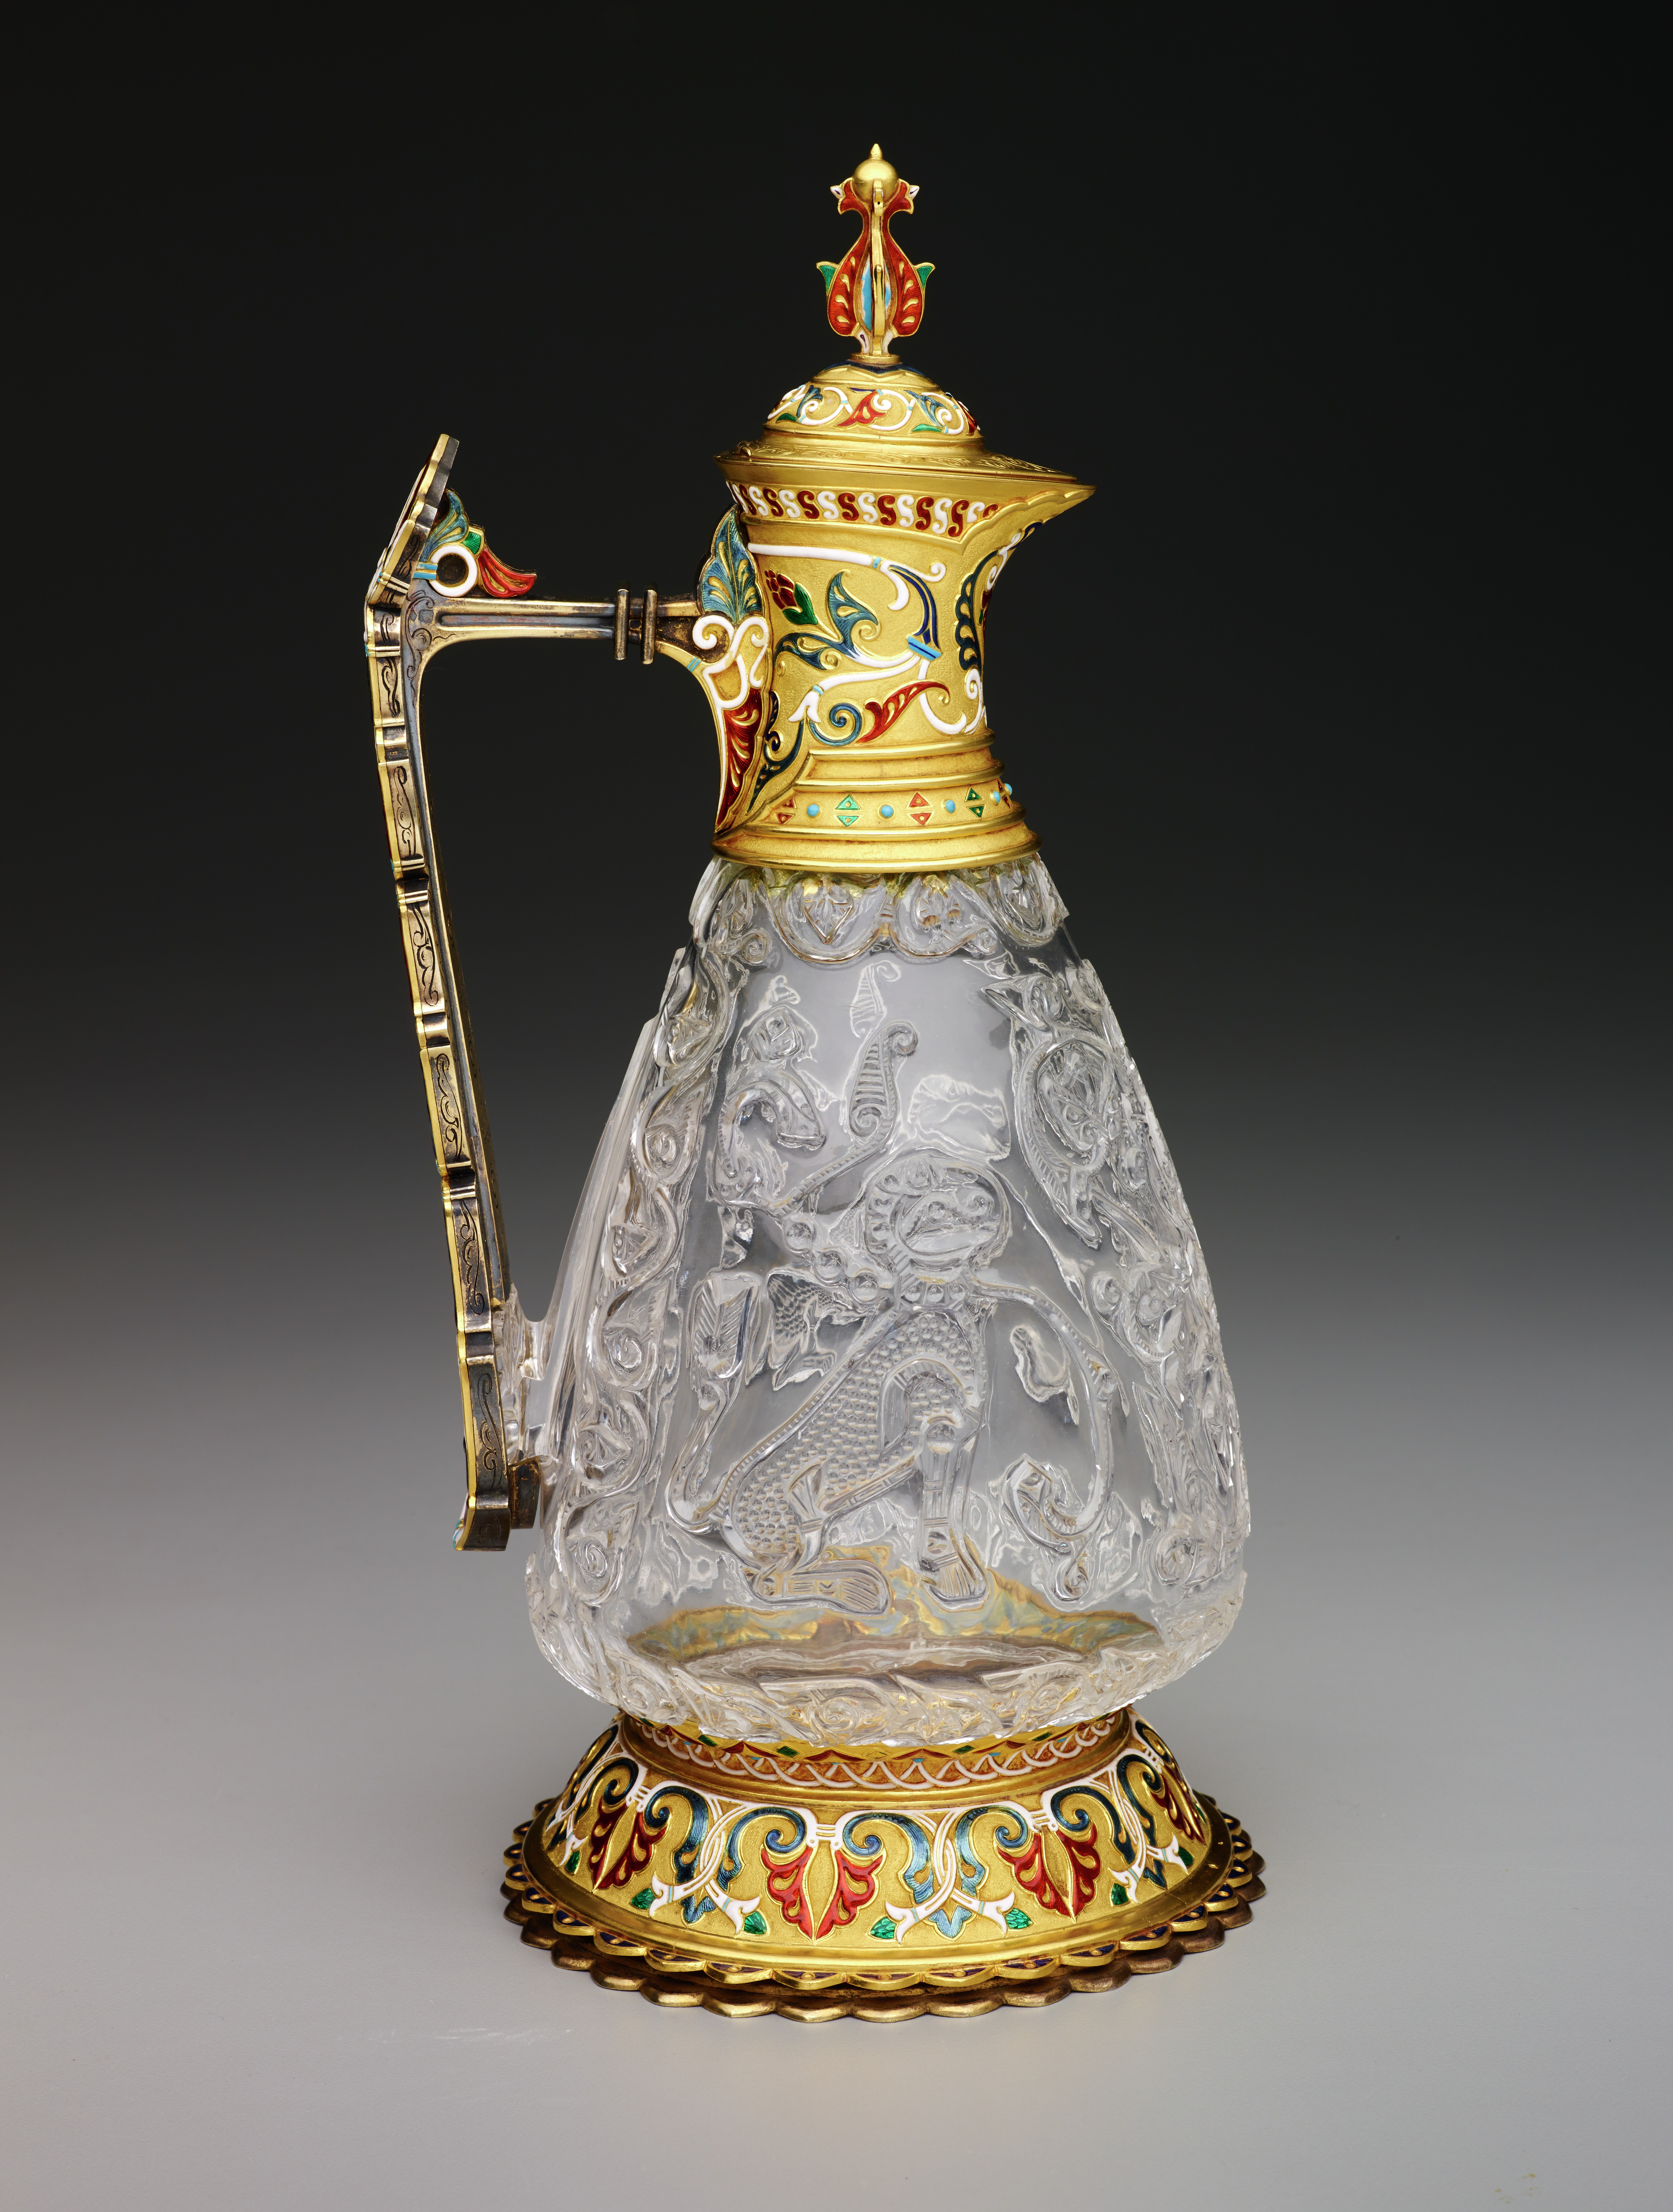 Ewer, late 10th or early 11th century, rock crystal, with enameled gold repairs and fittings by Jean-Valentin Morel (1794-1860), French, The Keir Collection of Islamic Art, on loan to the Dallas Museum of Art, K.1.2014.1.A-B. Photo: Image provided courtesy of Dallas Museum of Art 